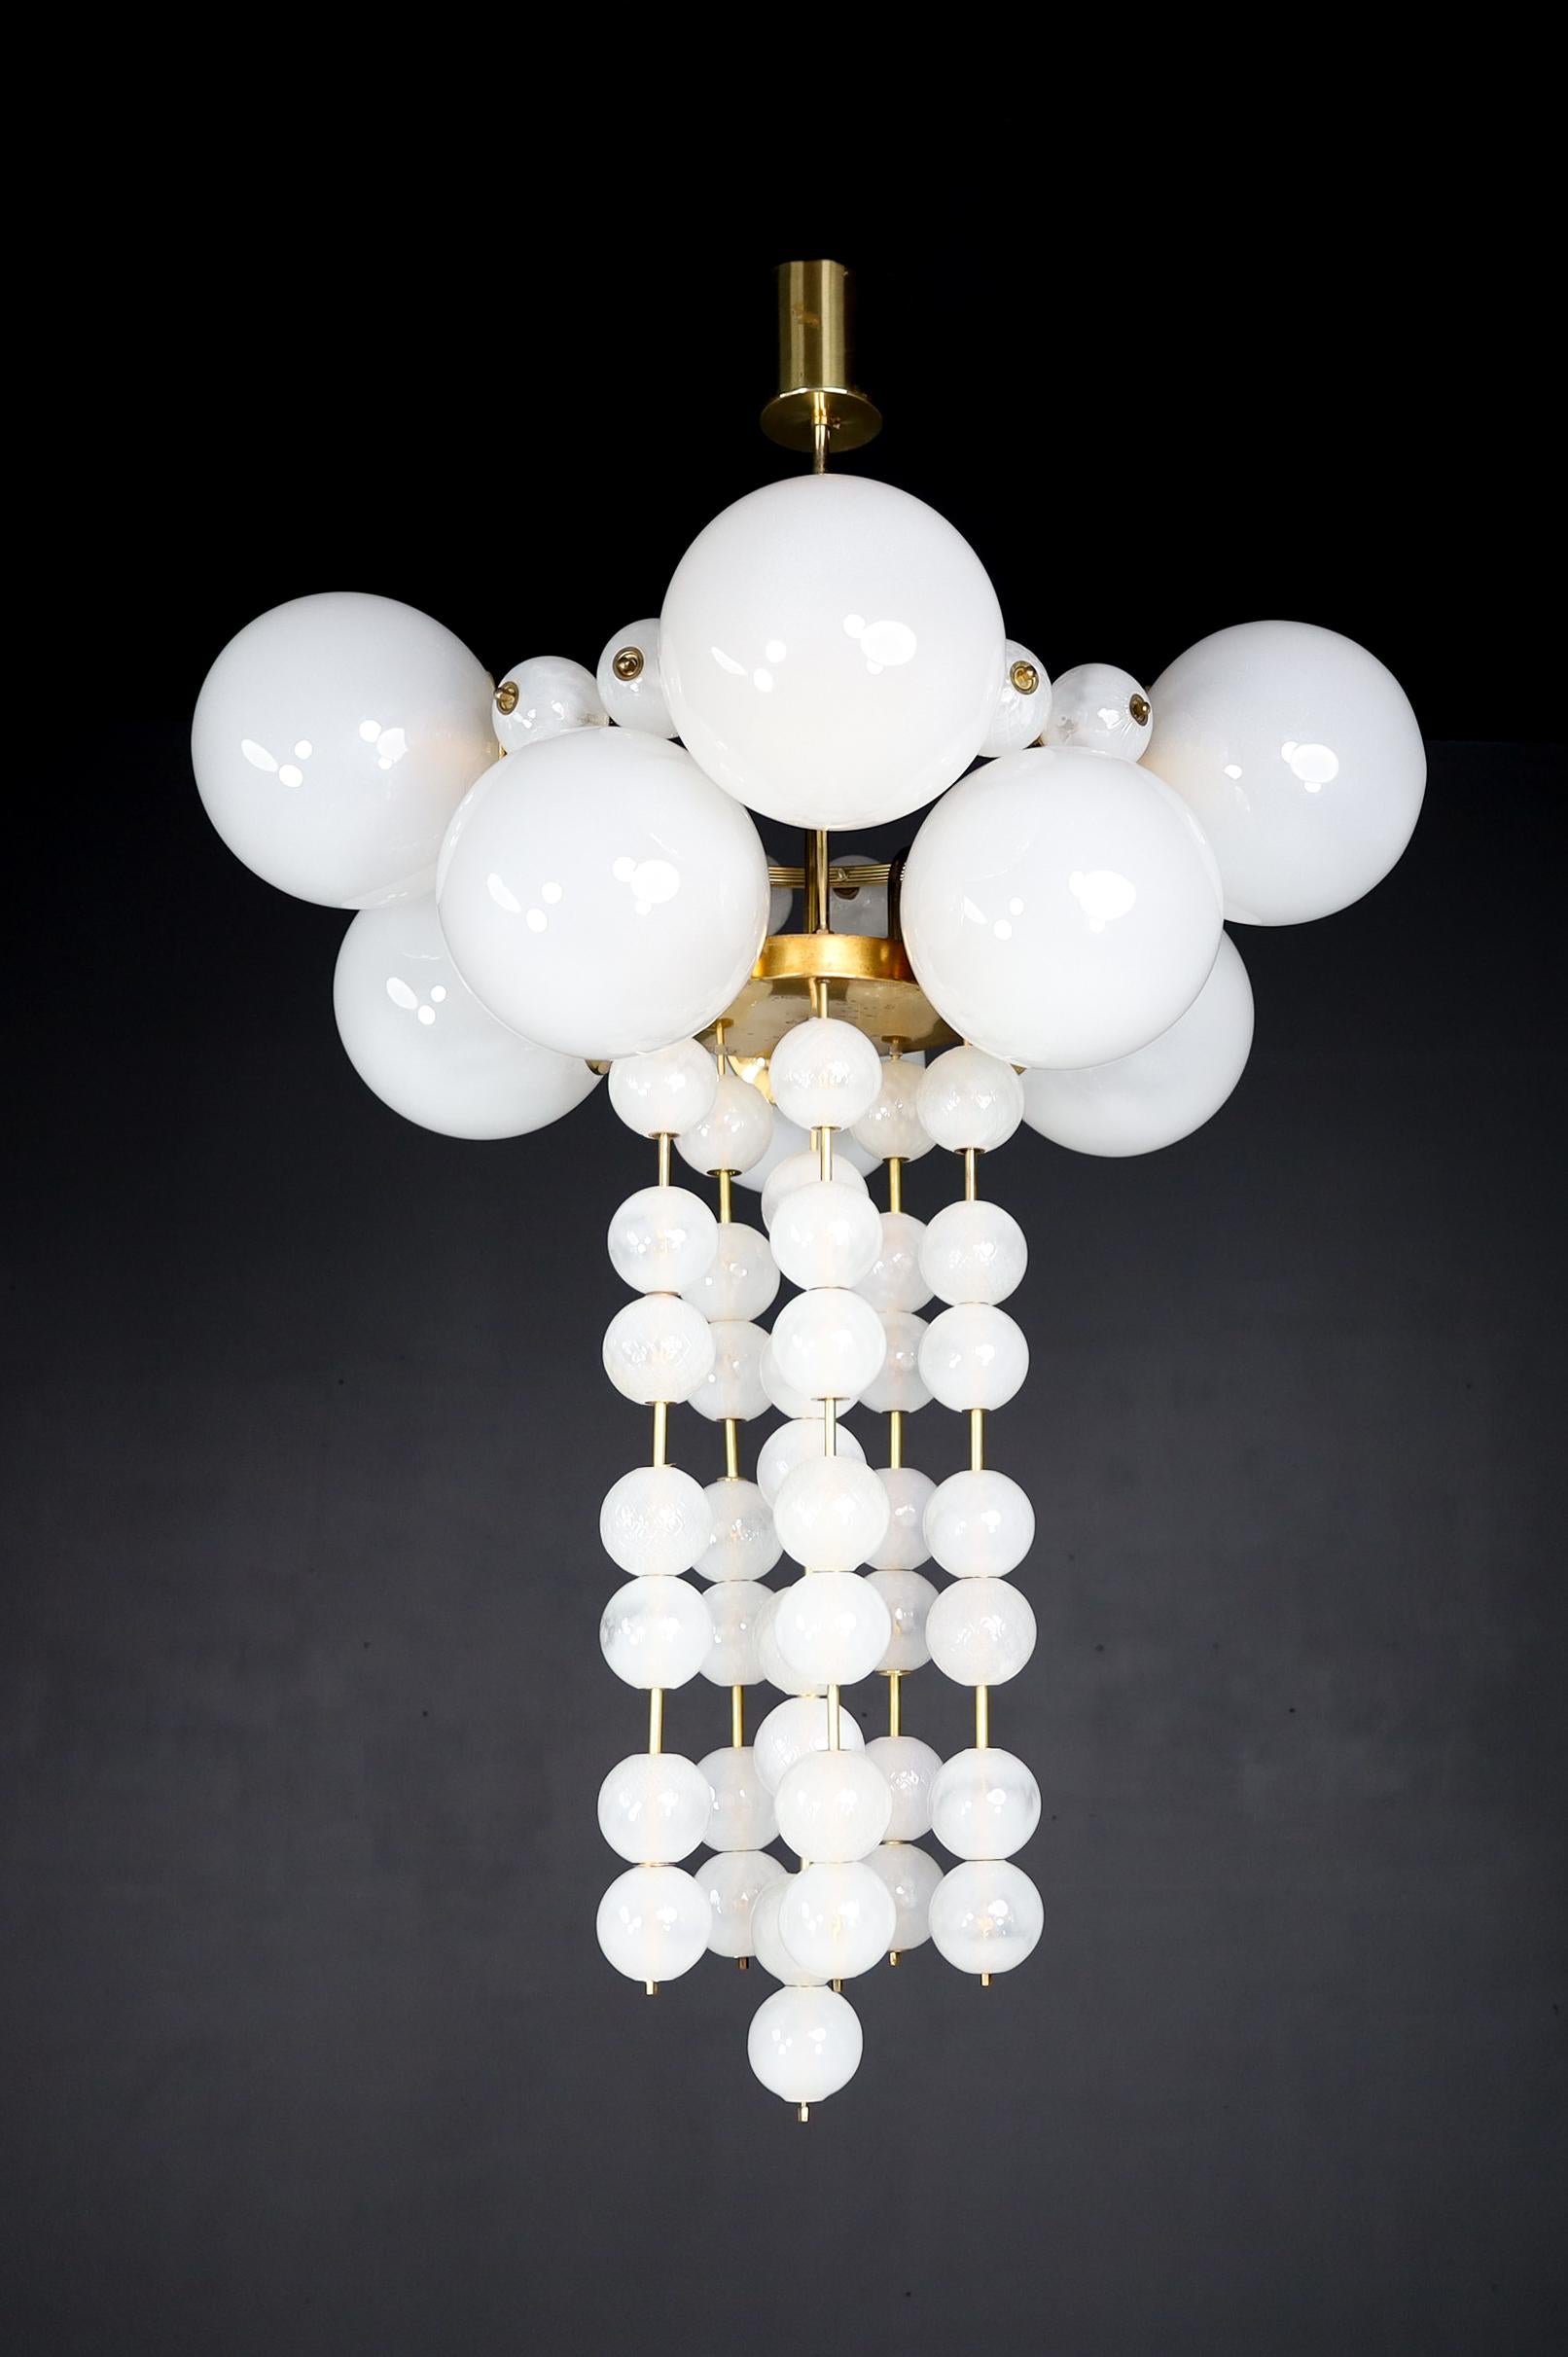 Pair of two Grand Bohemian chandeliers with brass fixtures and hand-blowed frosted glass globes, Czechia 1960s

A pair of two large Bohemian chandeliers with a brass fixture was produced and designed in Czechia in the 1960s. A total of ten large